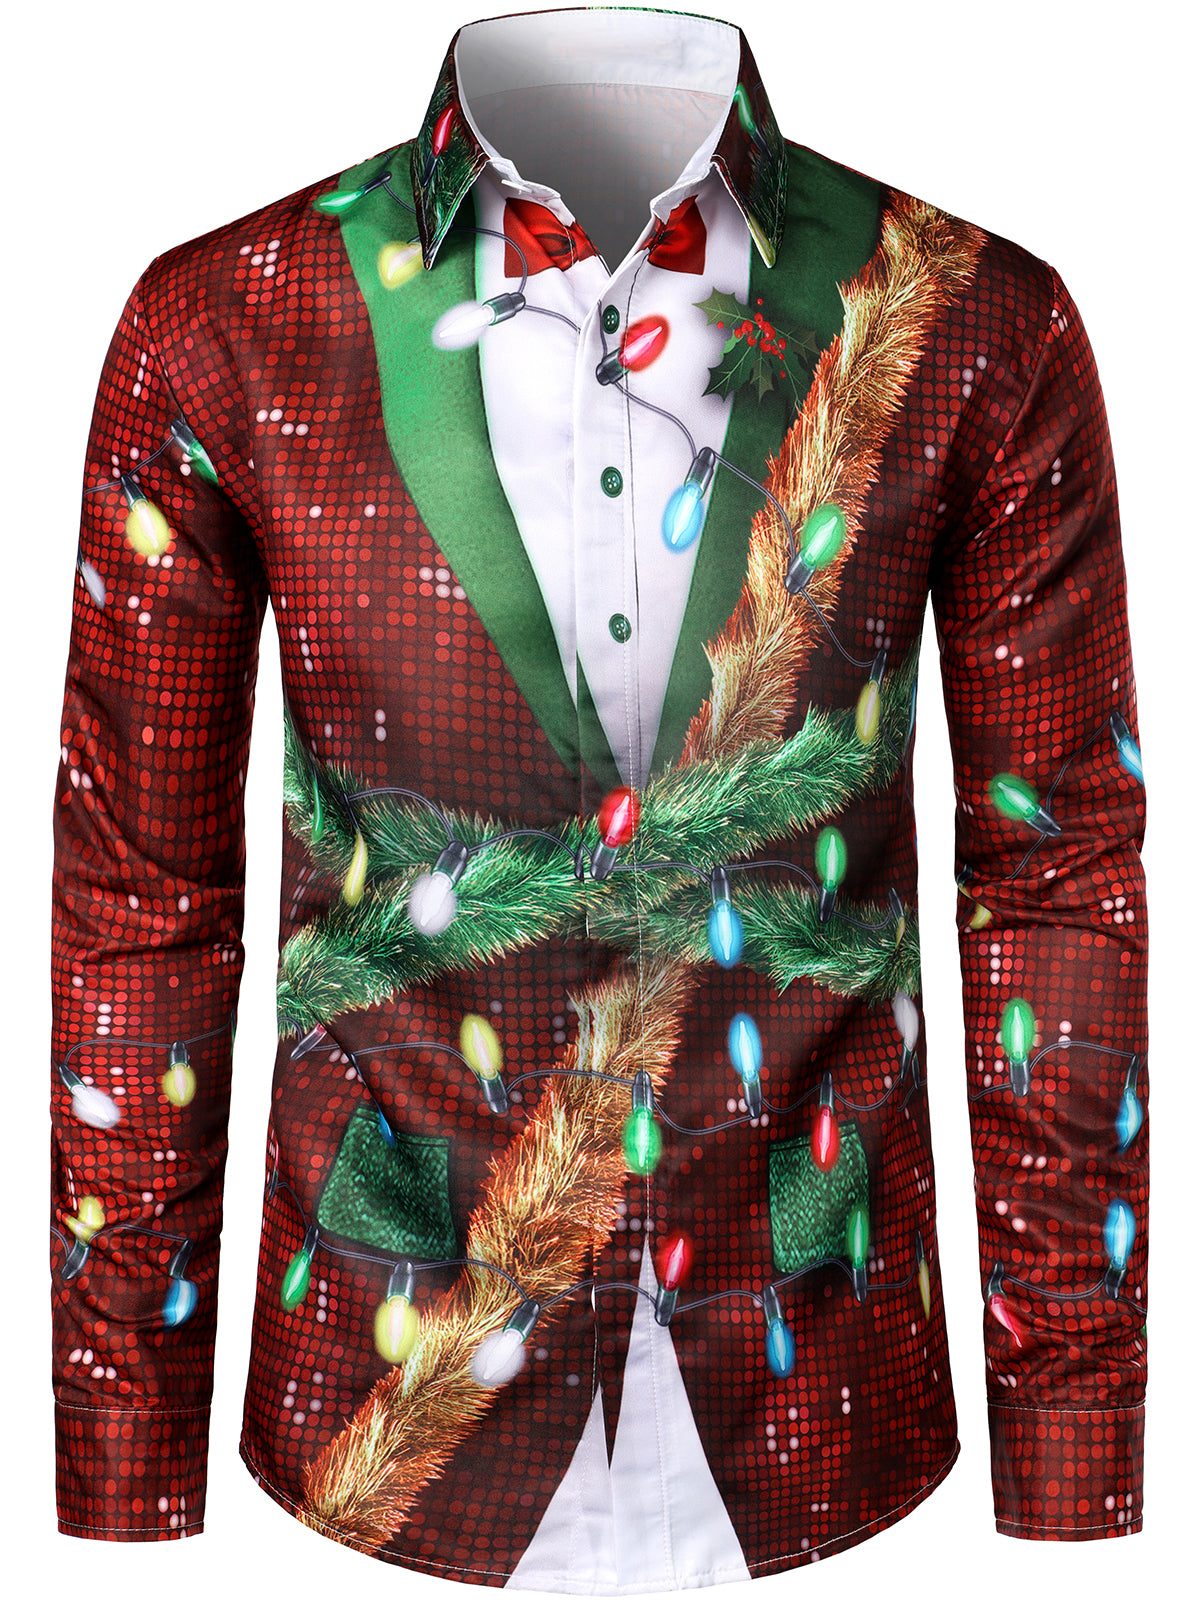 Men's Christmas Funny Outfit Themed Top Vacation Button Up Long Sleeve Dress Shirt